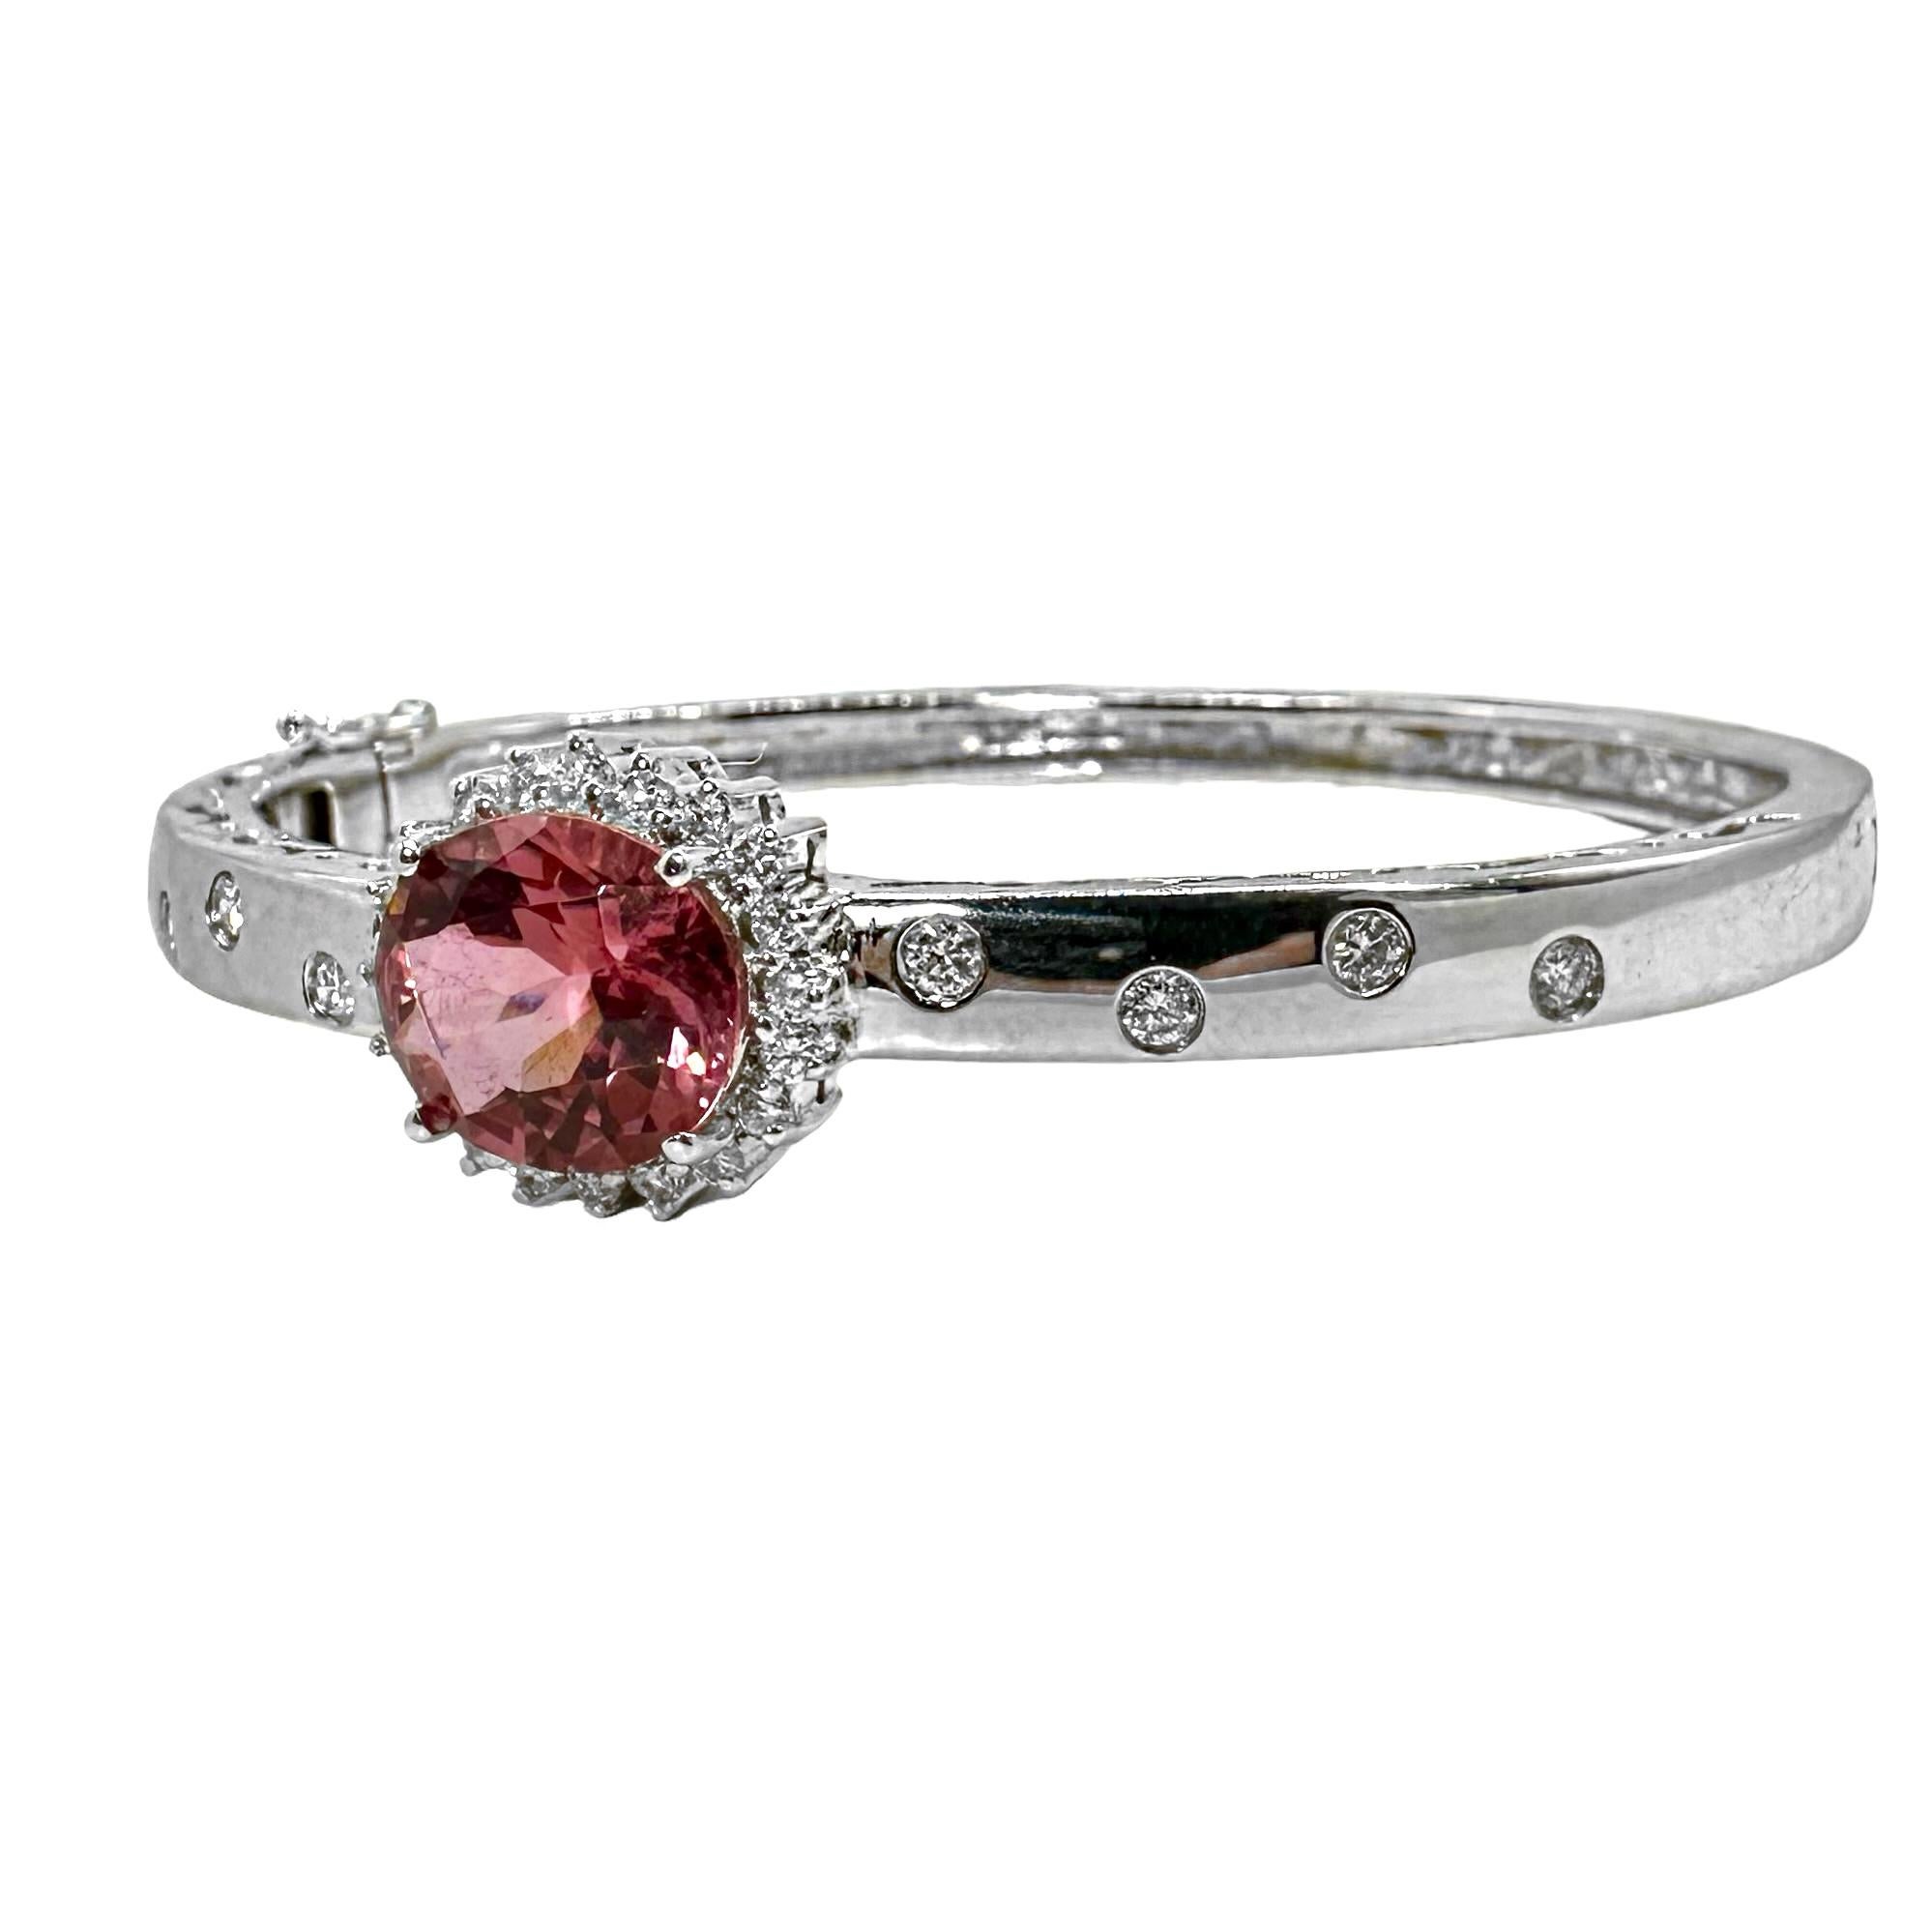 White Gold Bangle Bracelet with 4.27ct Oval Pink Tourmaline and Diamond Halo For Sale 1